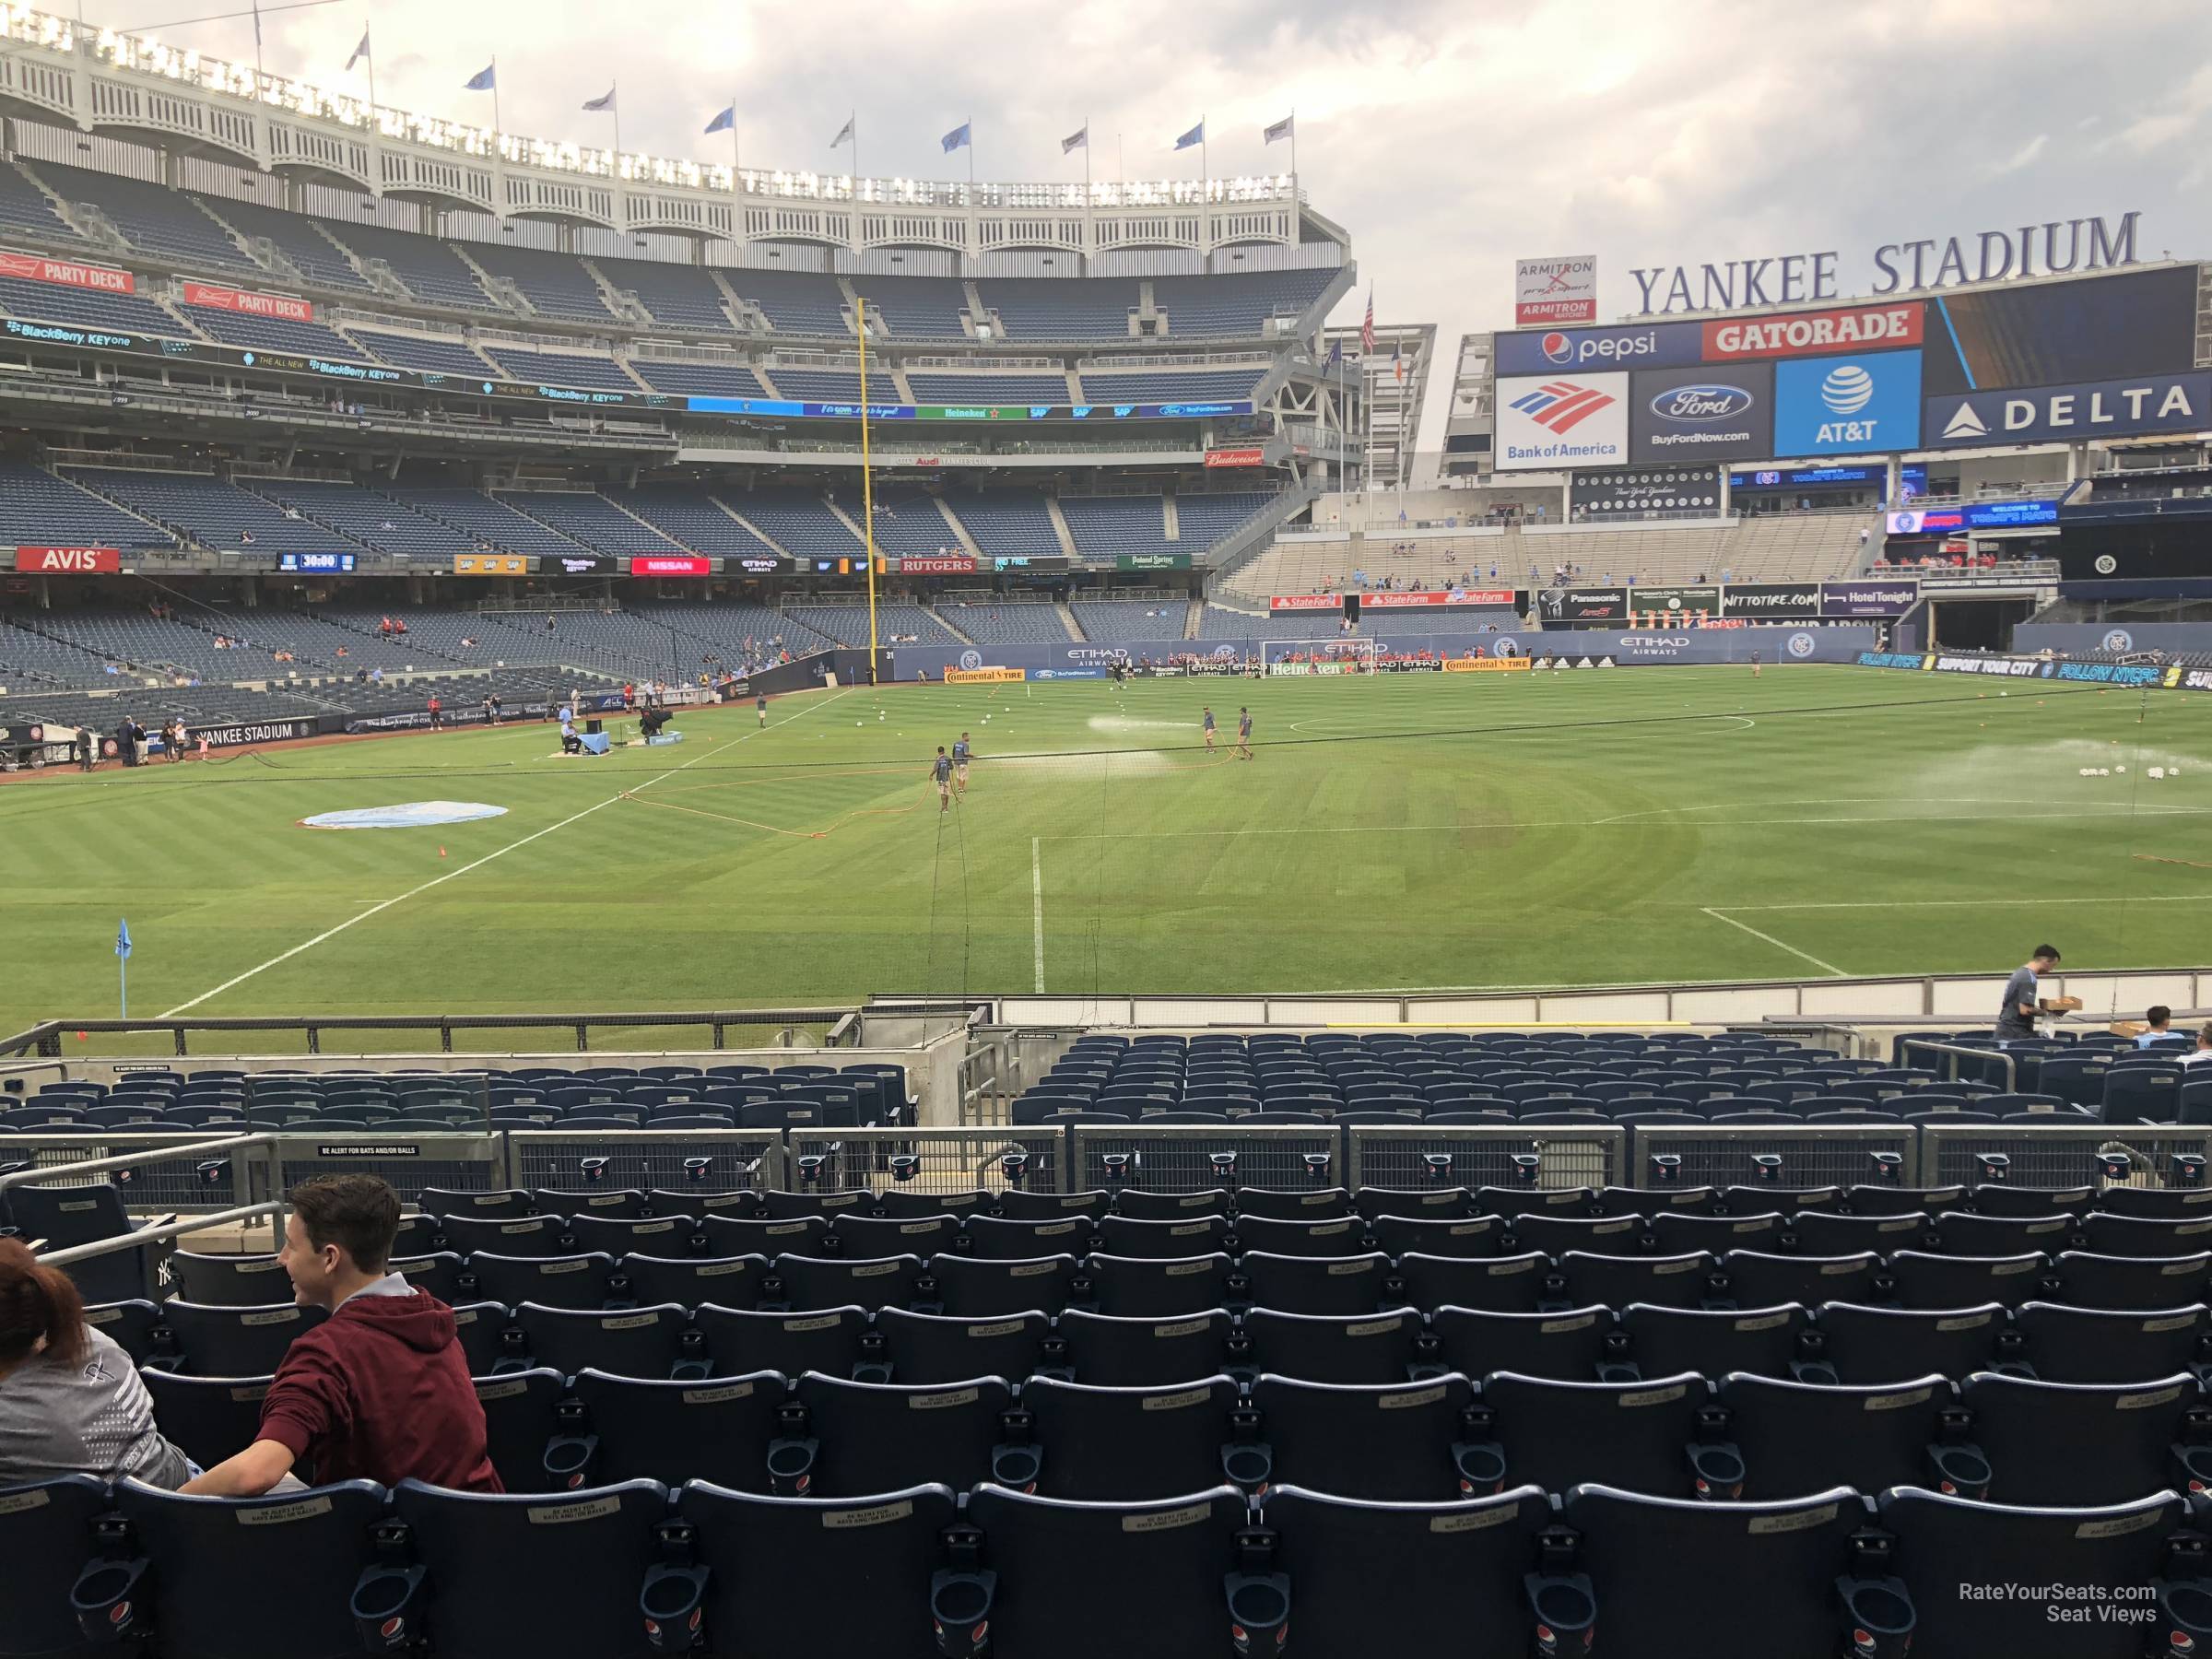 section 114b, row 10 seat view  for soccer - yankee stadium